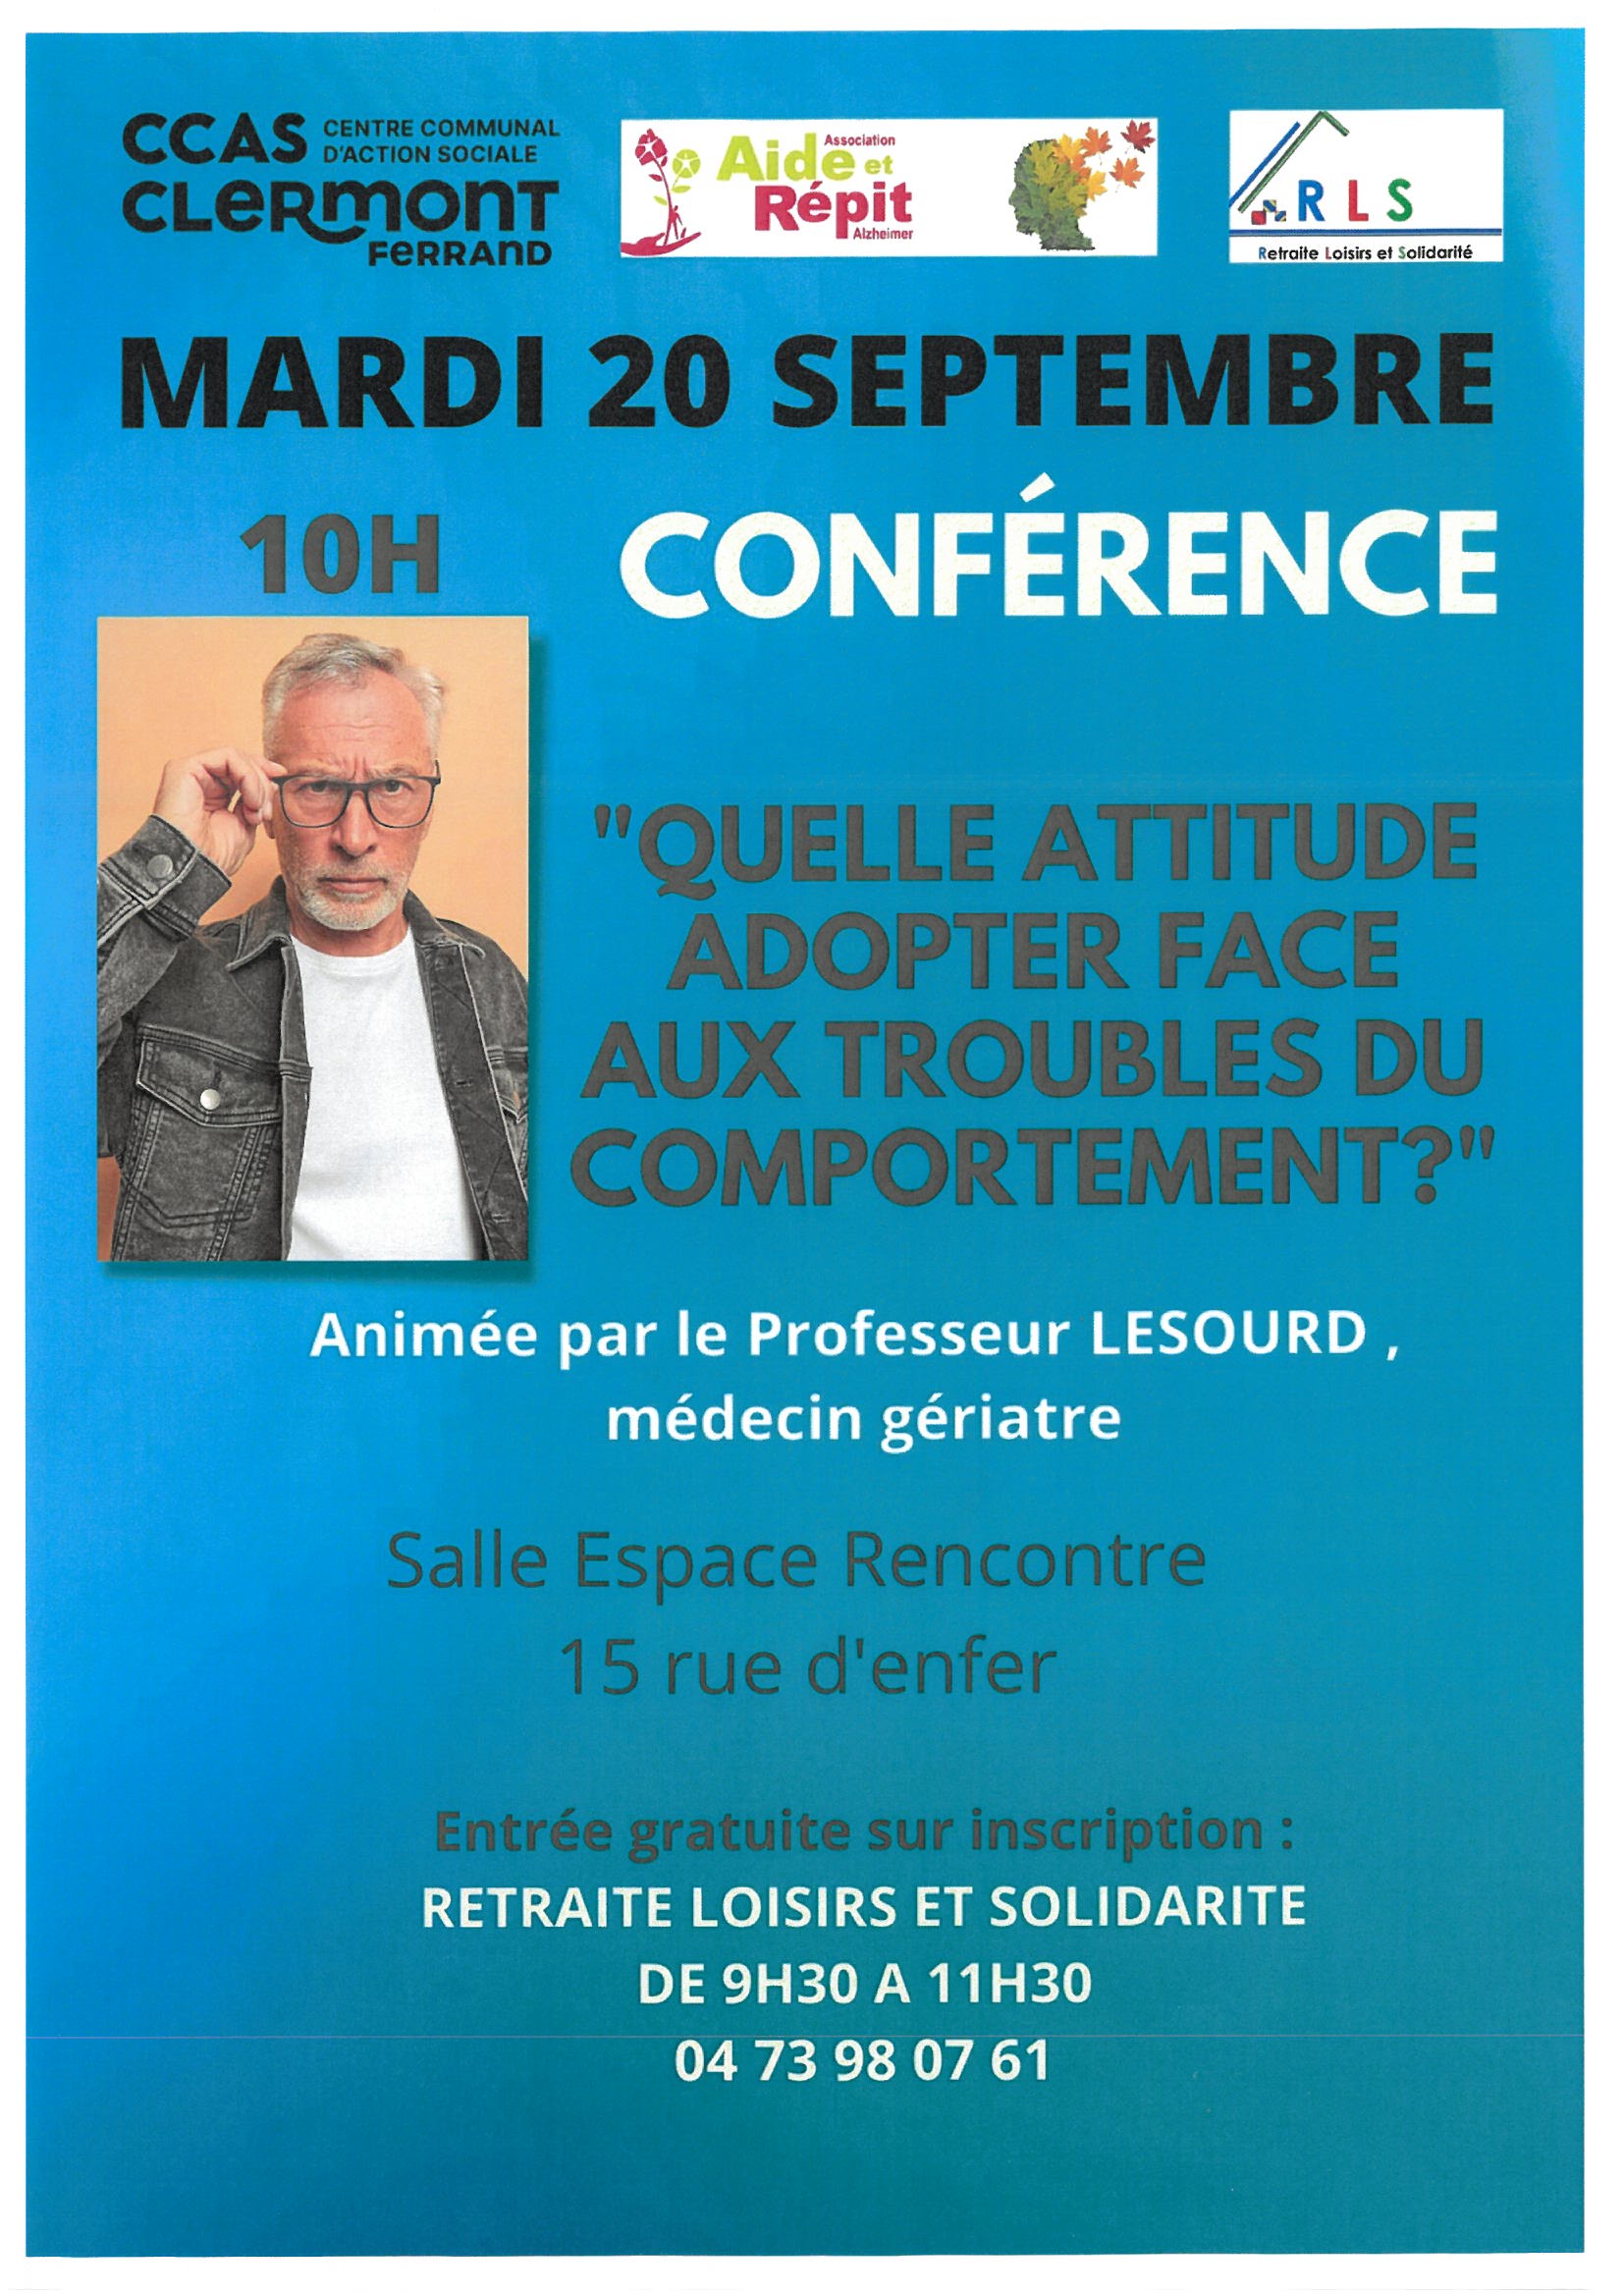 CONFERENCE COMPORTEMENT 12092022